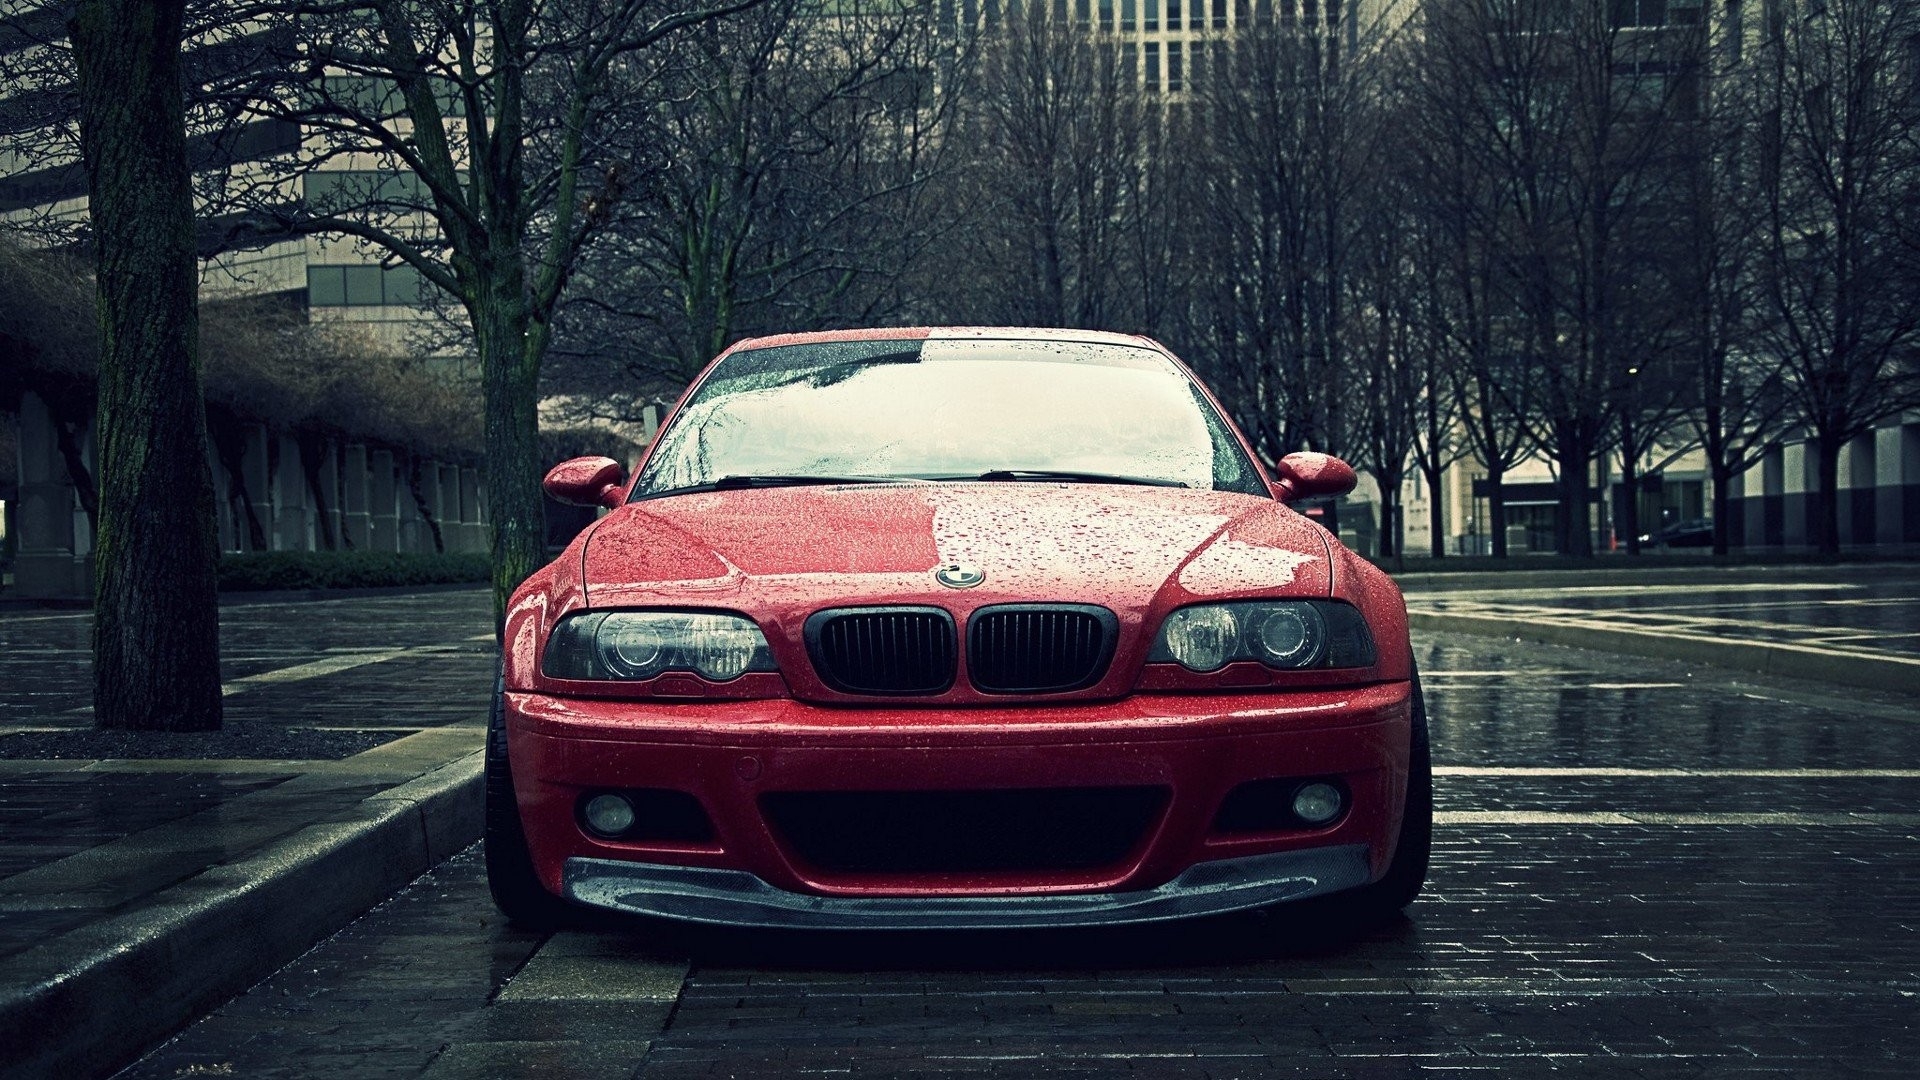 Wallpapers wallpaper bmw e46 front view red car on the desktop